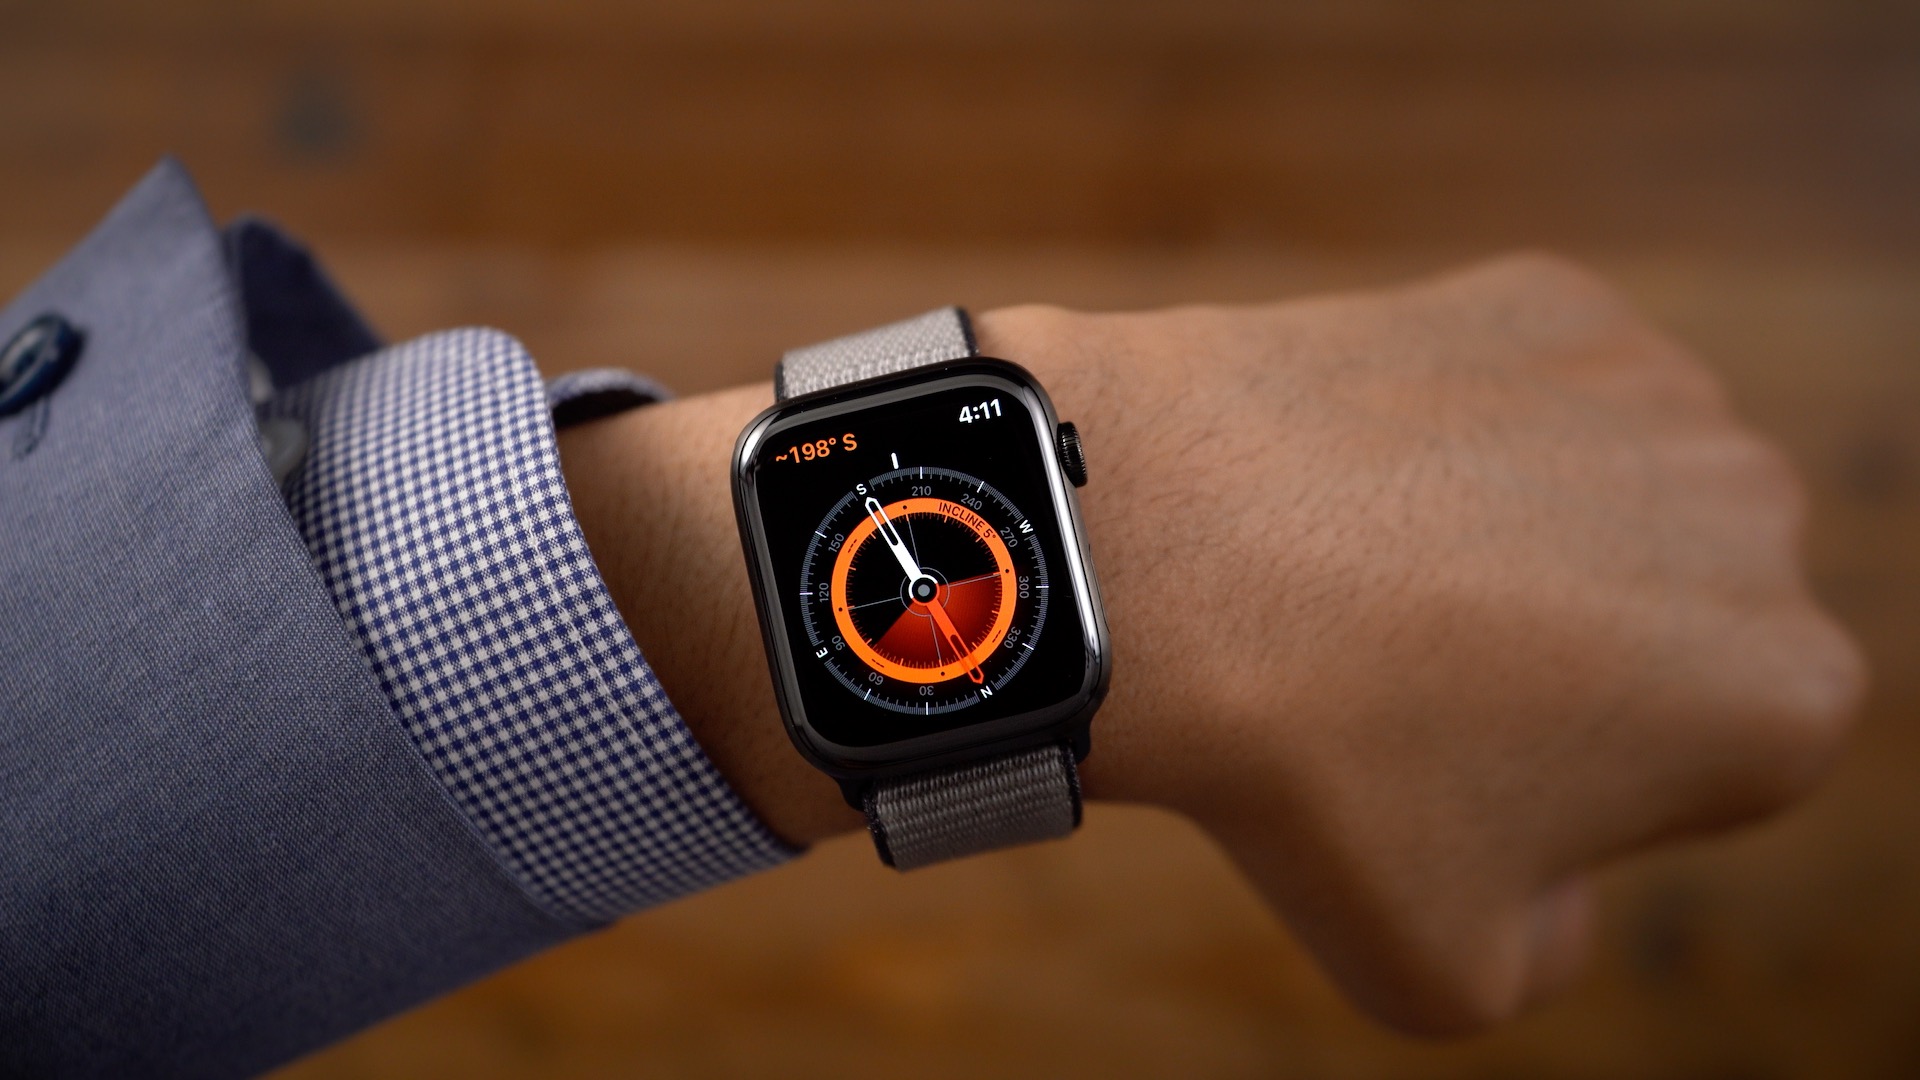 Apple Watch Series 5 Video Review The Always On Display Is A Key Feature